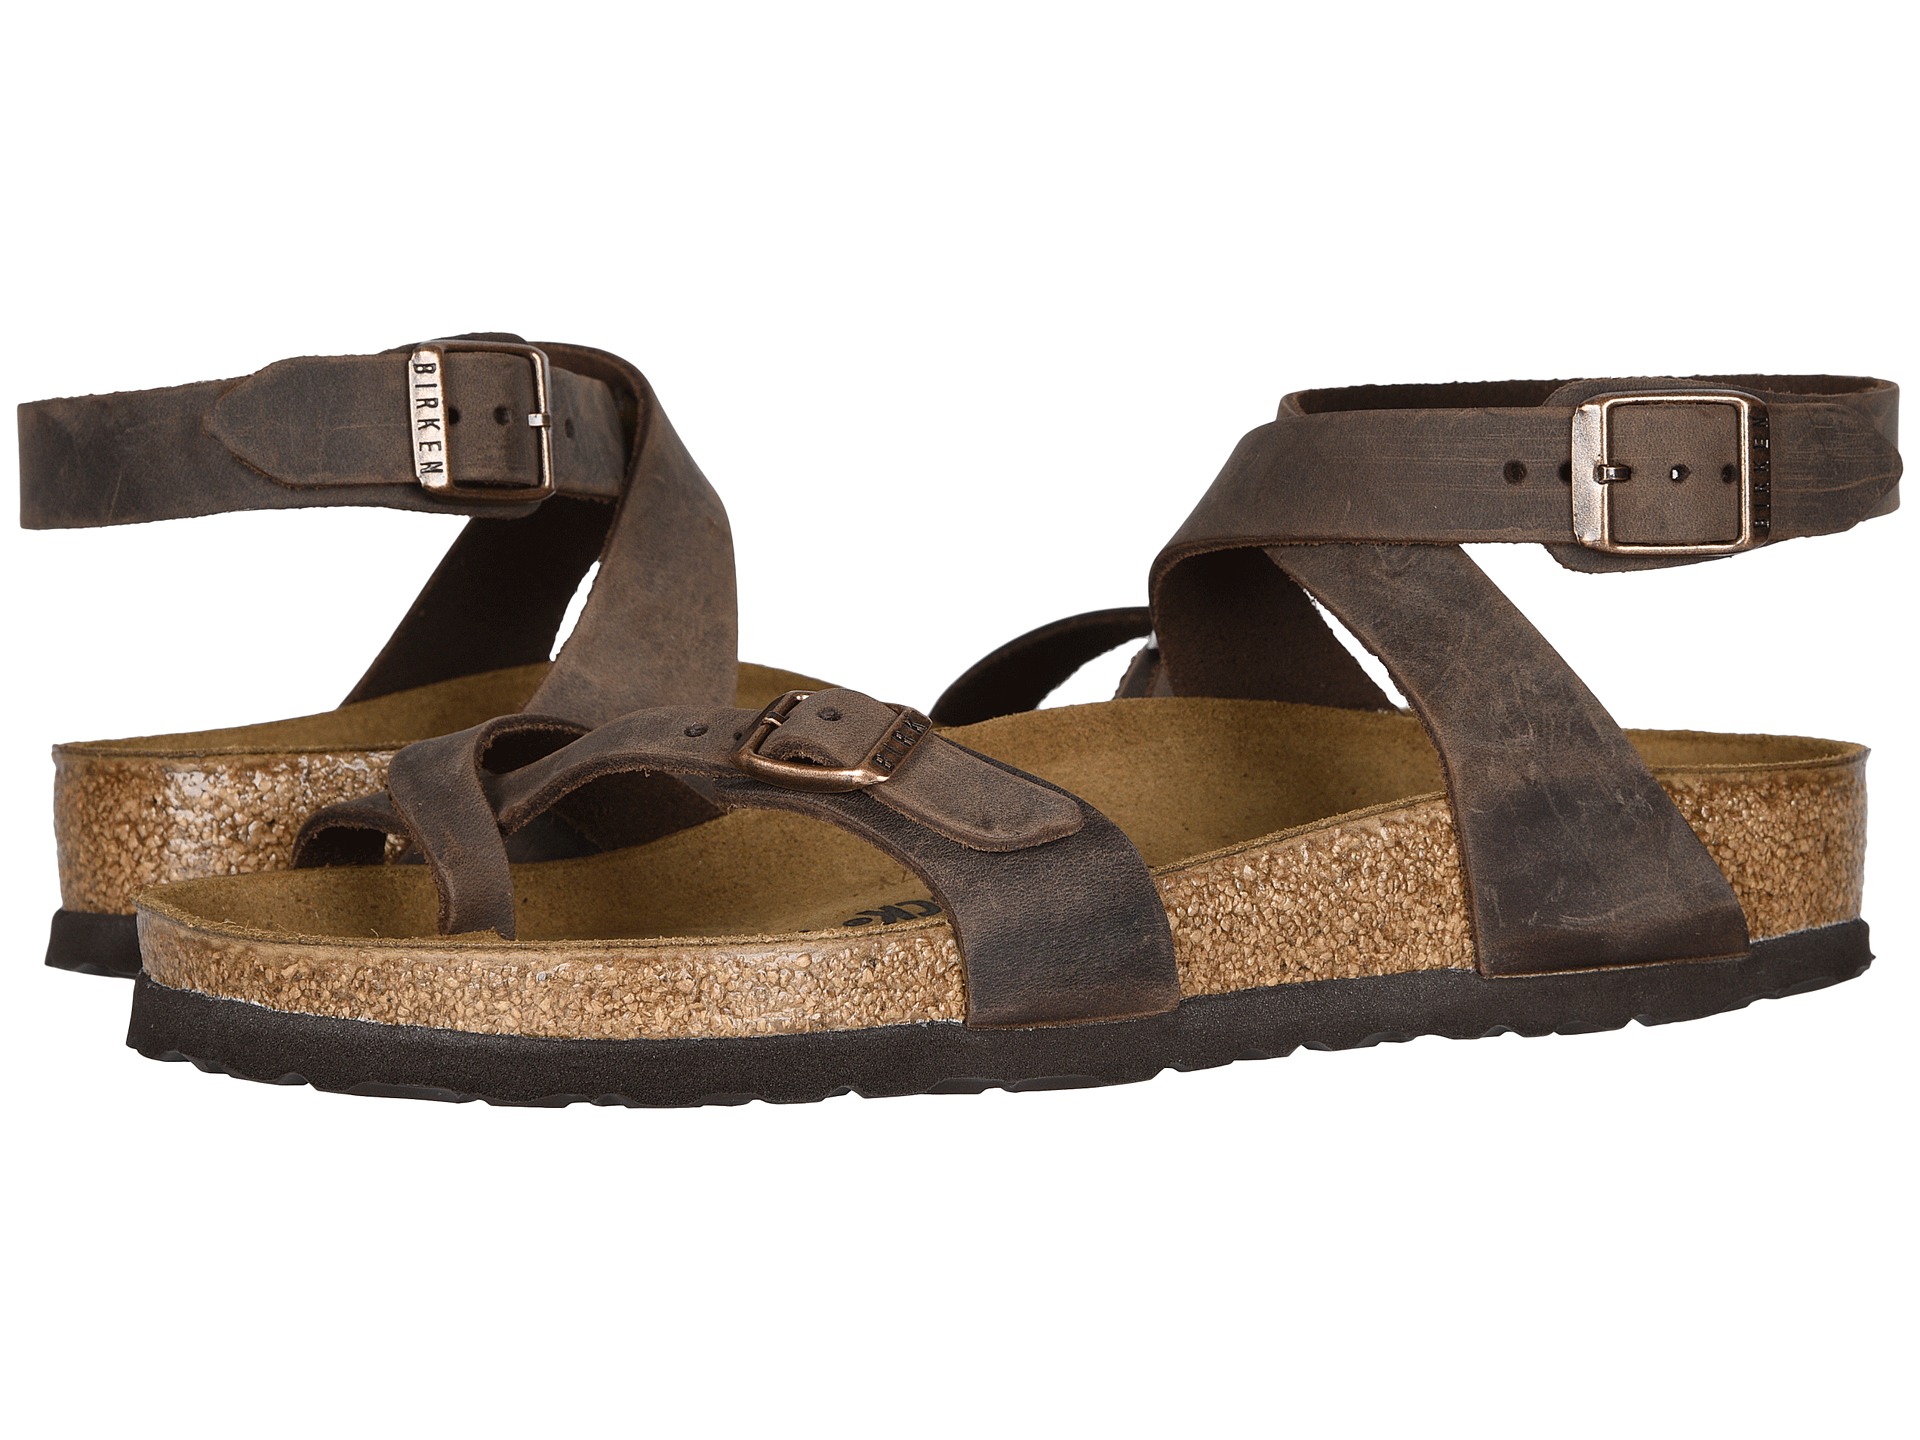 Birkenstock Yara Oiled Leather, Shoes | Shipped Free at Zappos